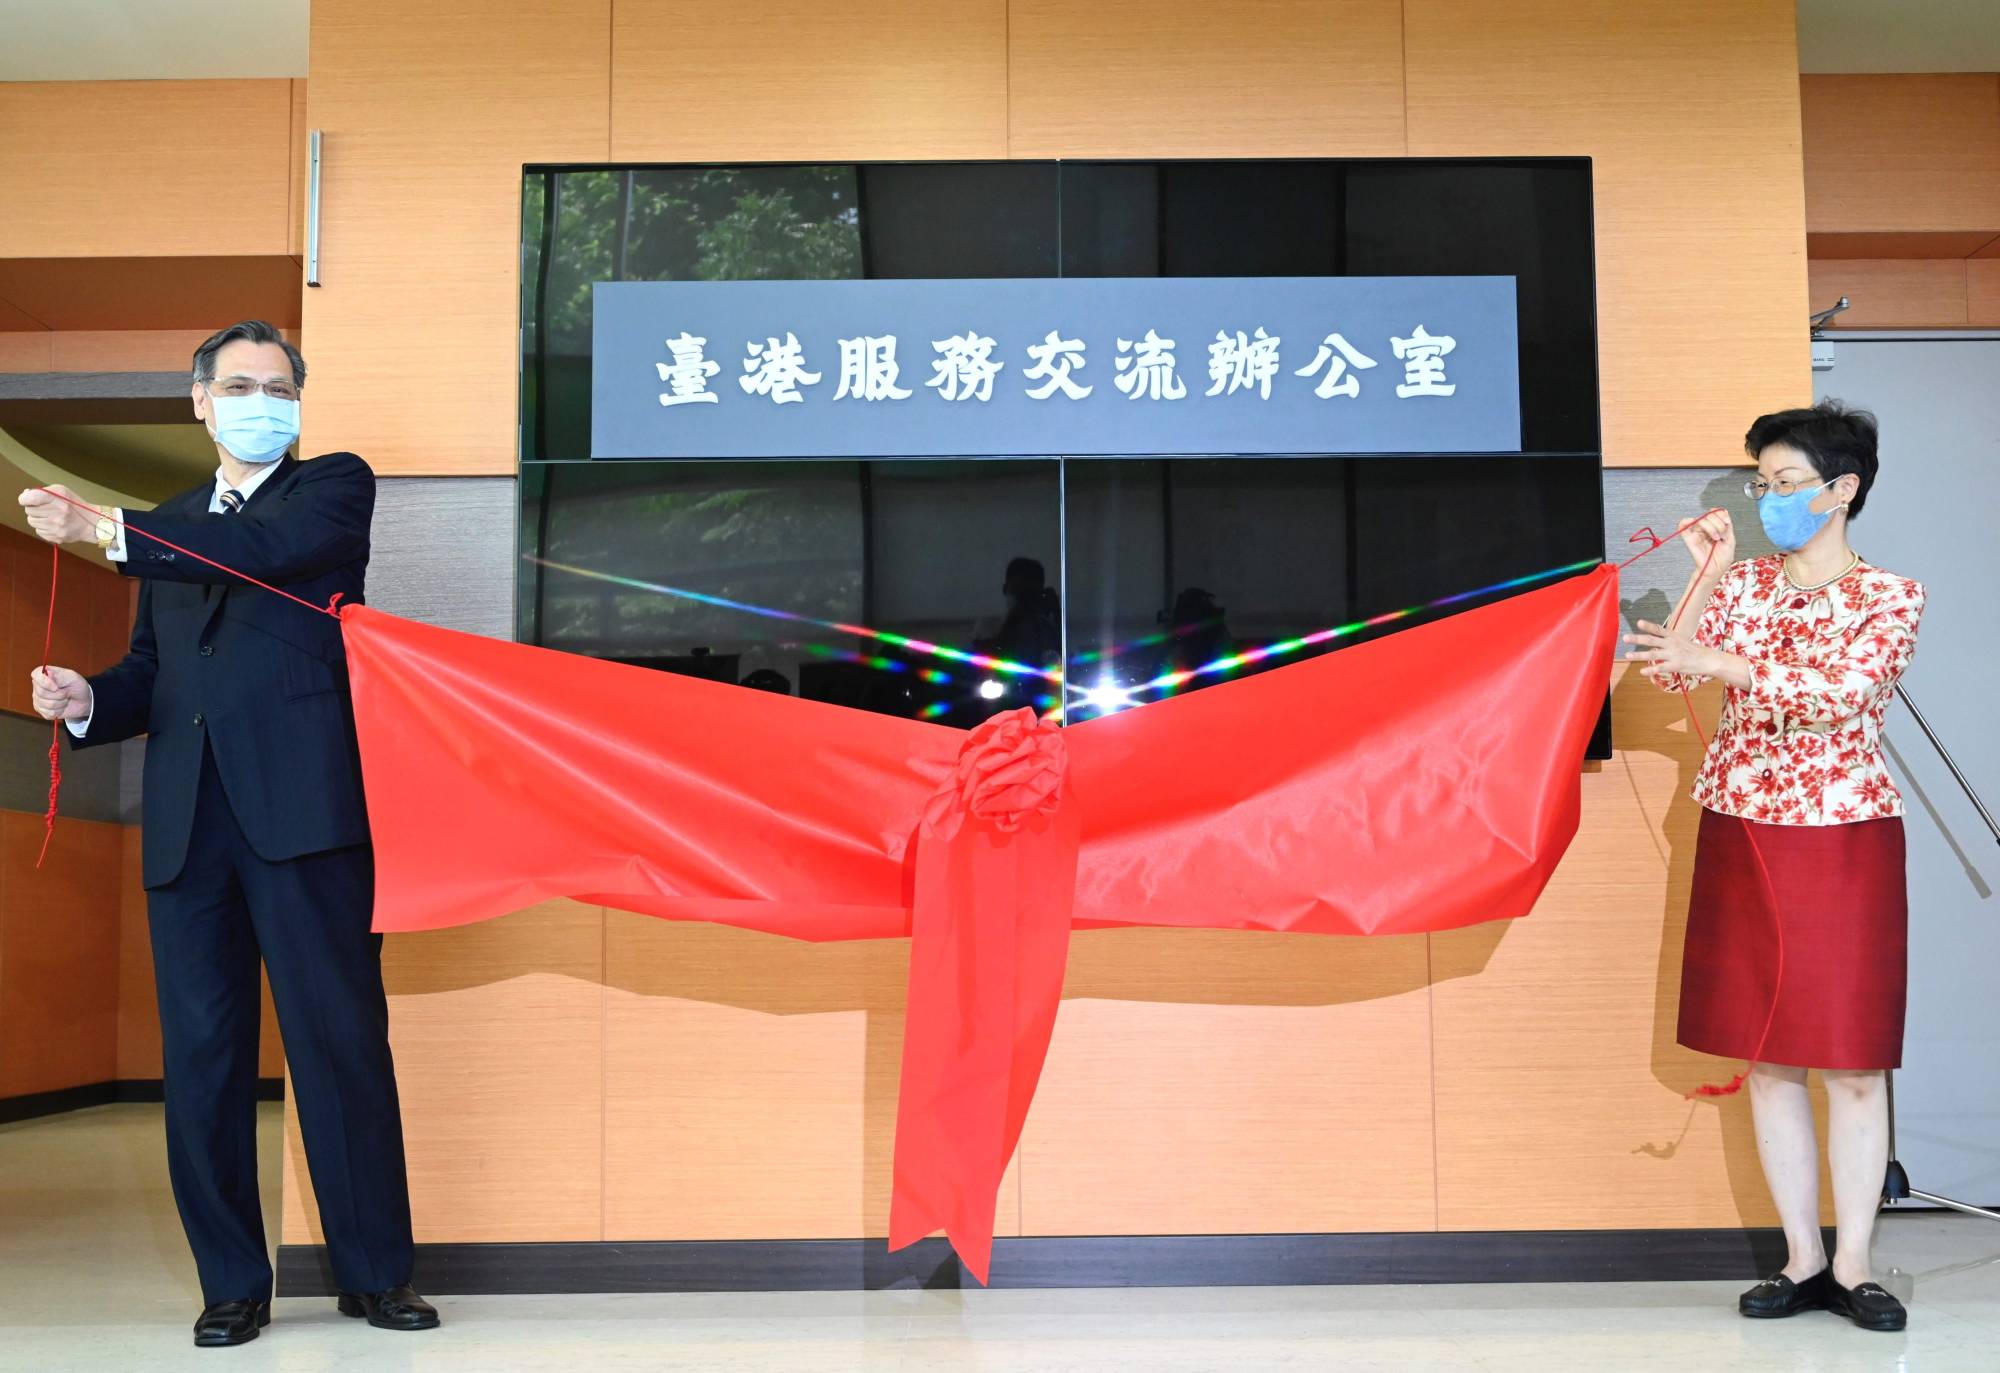 Chen Ming-tong (left), minister of Taiwan's Mainland Affairs Council, and Katharine Chang, chairwoman of Taiwan's Hong Kong Economic and Cultural Co-operation Council, unveil a sign during a launch ceremony for the Taiwan-Hong Kong Office for Exchange and Services in Taipei on Wednesday. | AFP-JIJI